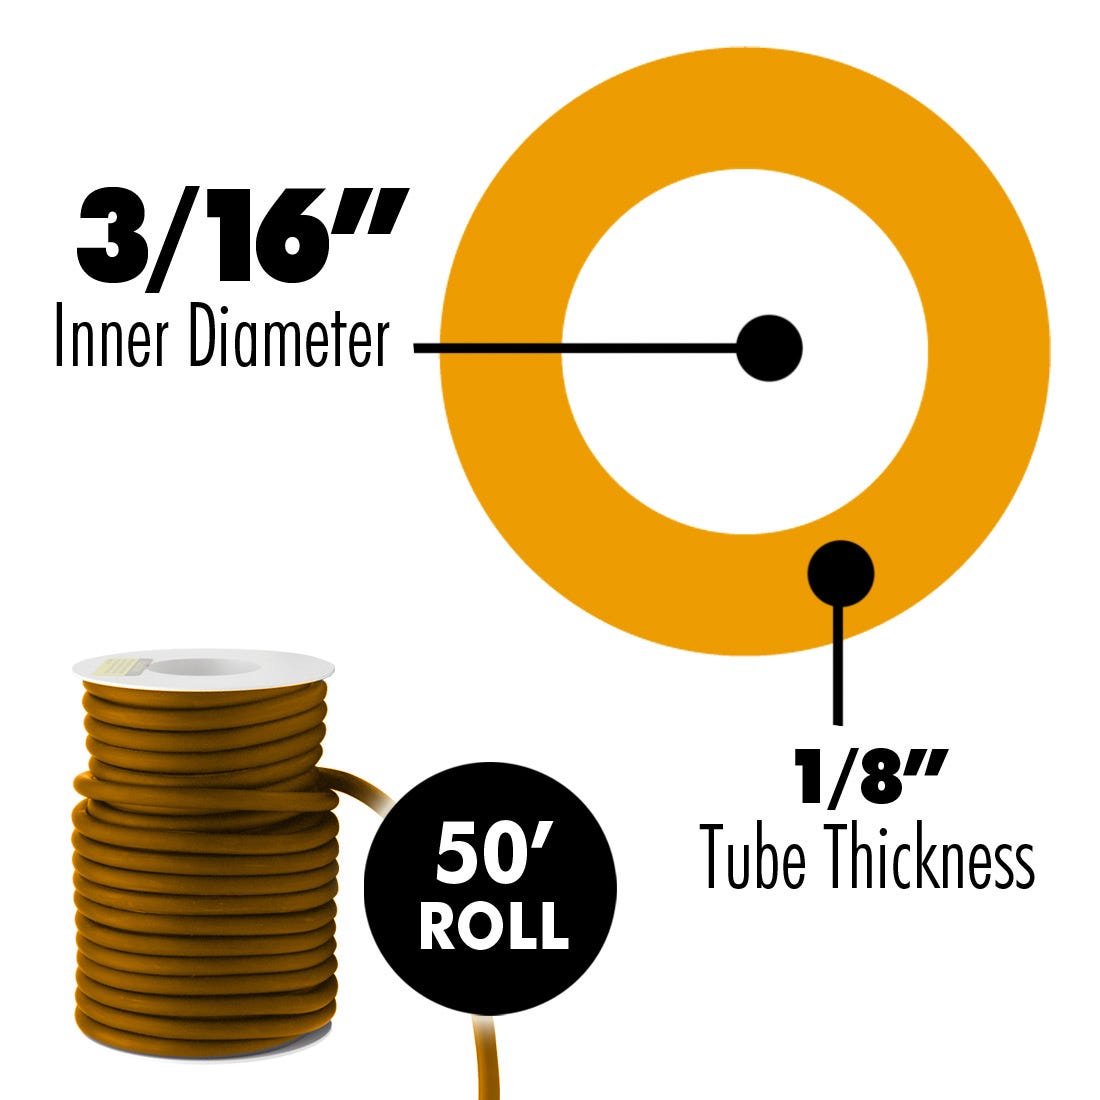 ACE Latex Rubber Tubing Amber ,3/16" x 1/8"- 50' Roll